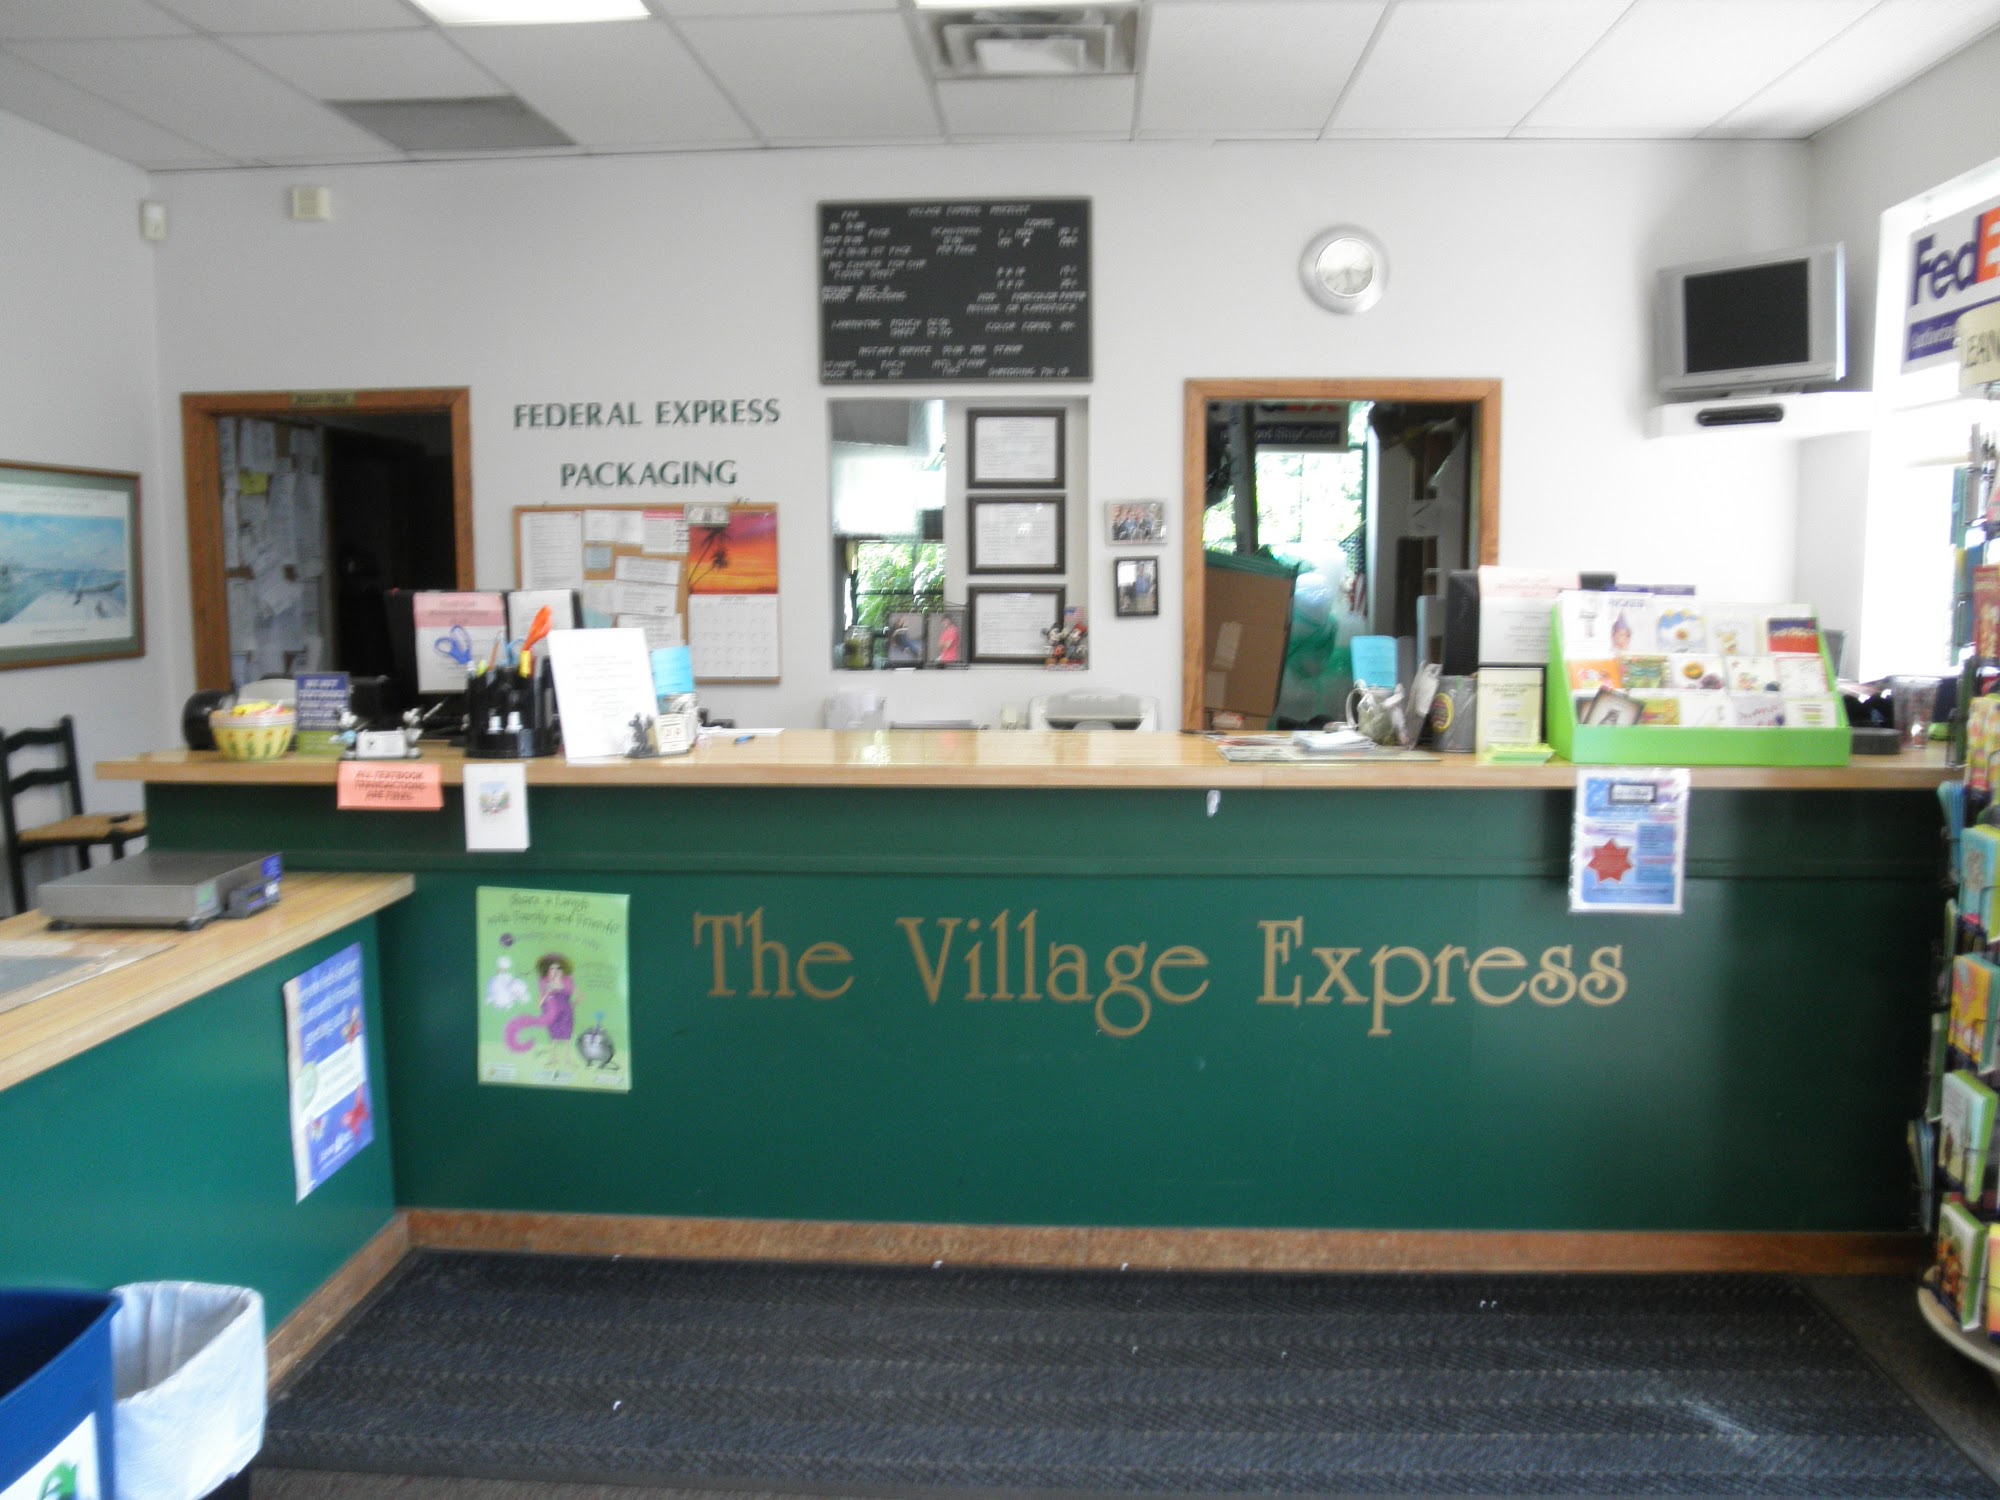 The Village Express Pack & Ship